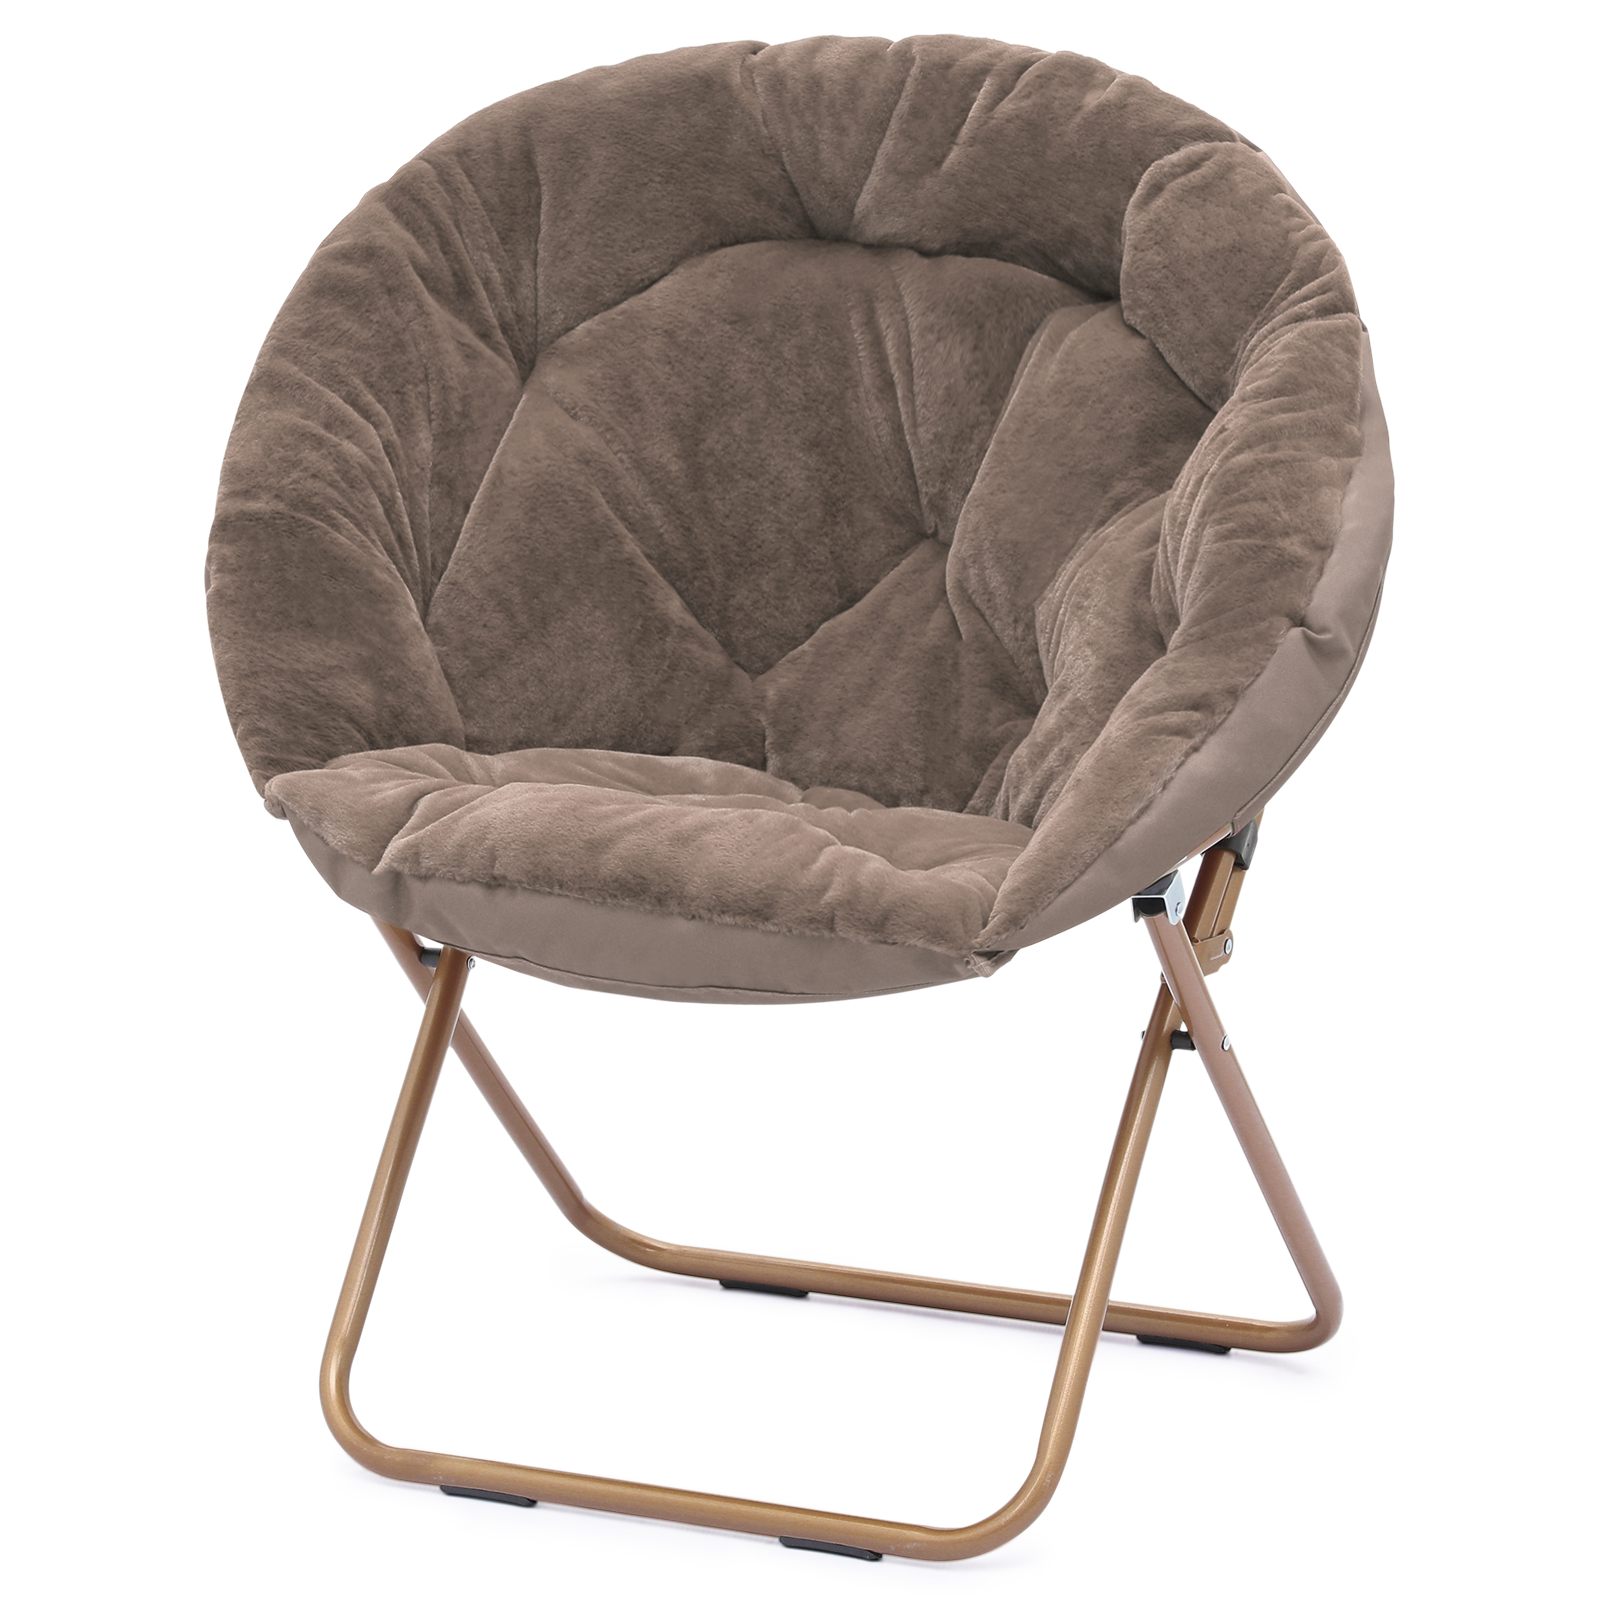 Magshion Comfy Saucer Chair, Foldable Faux Fur Lounge Chair for Bedroom Living Room, Cozy Moon Chair with Metal Frame for Adults, X-Large, Beige - image 1 of 10